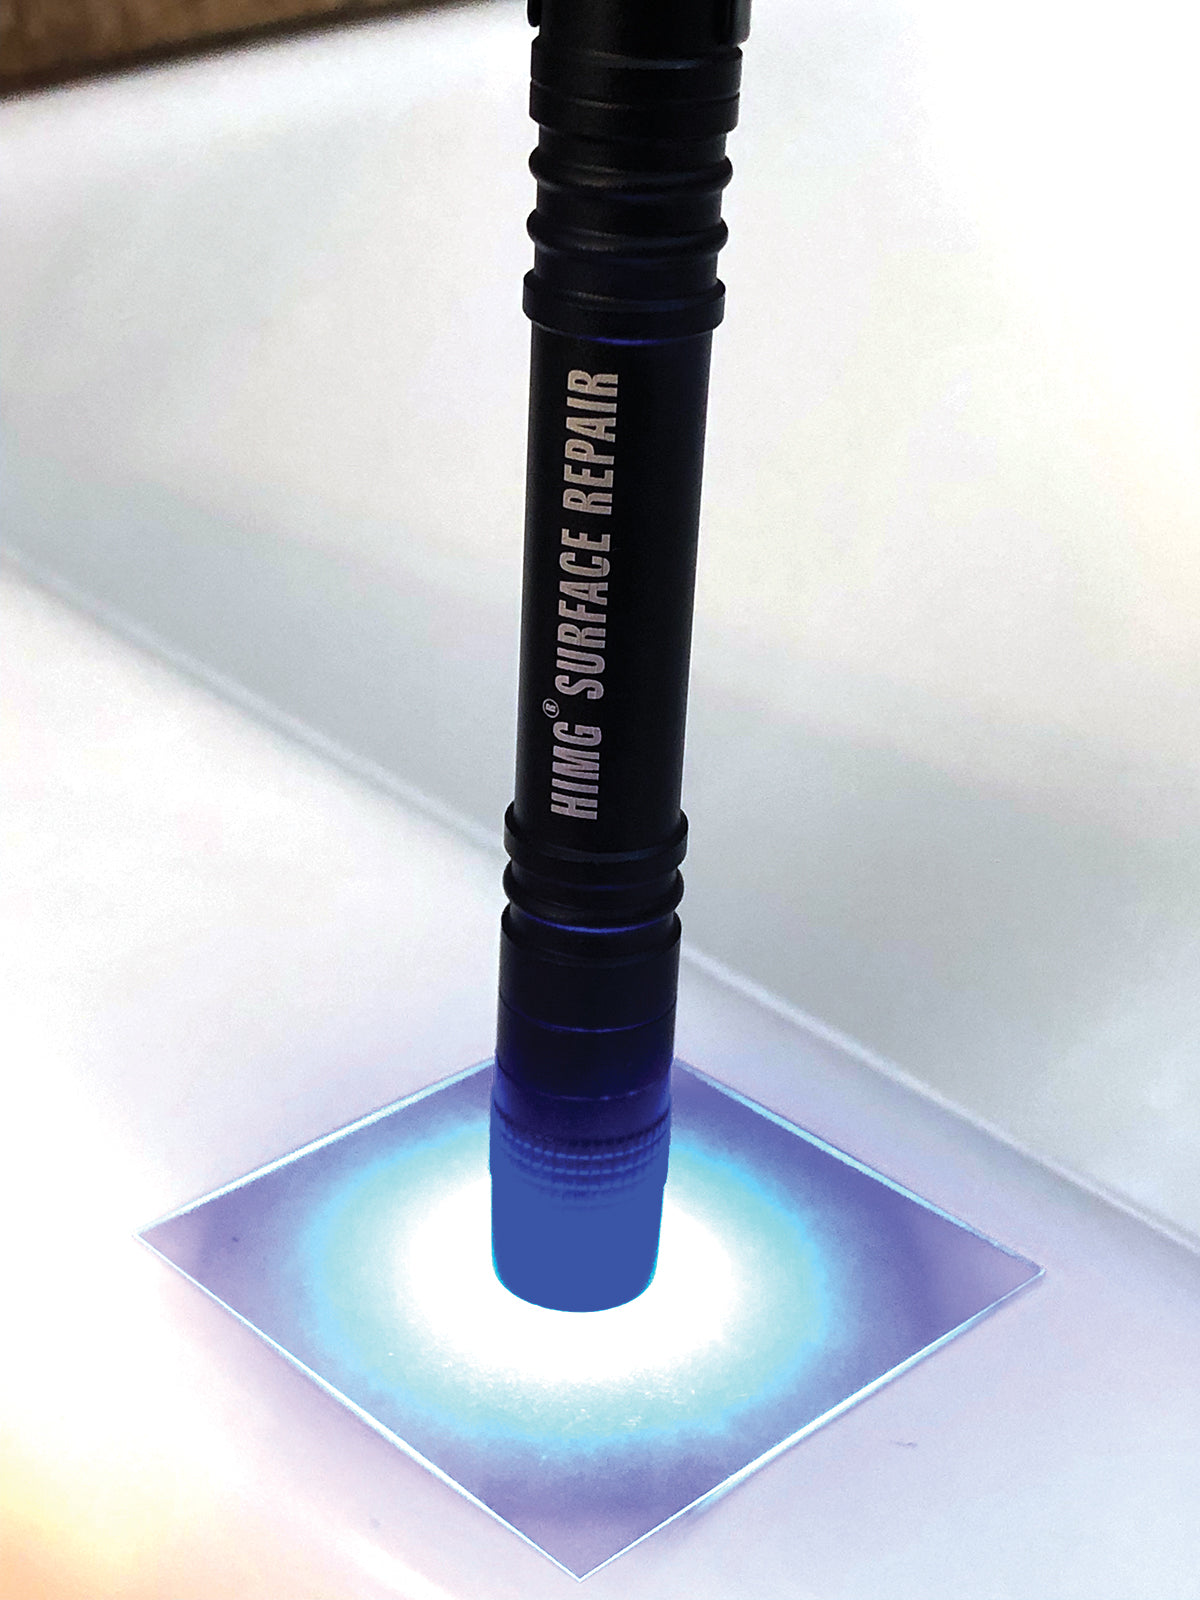 LED pen light for curing process